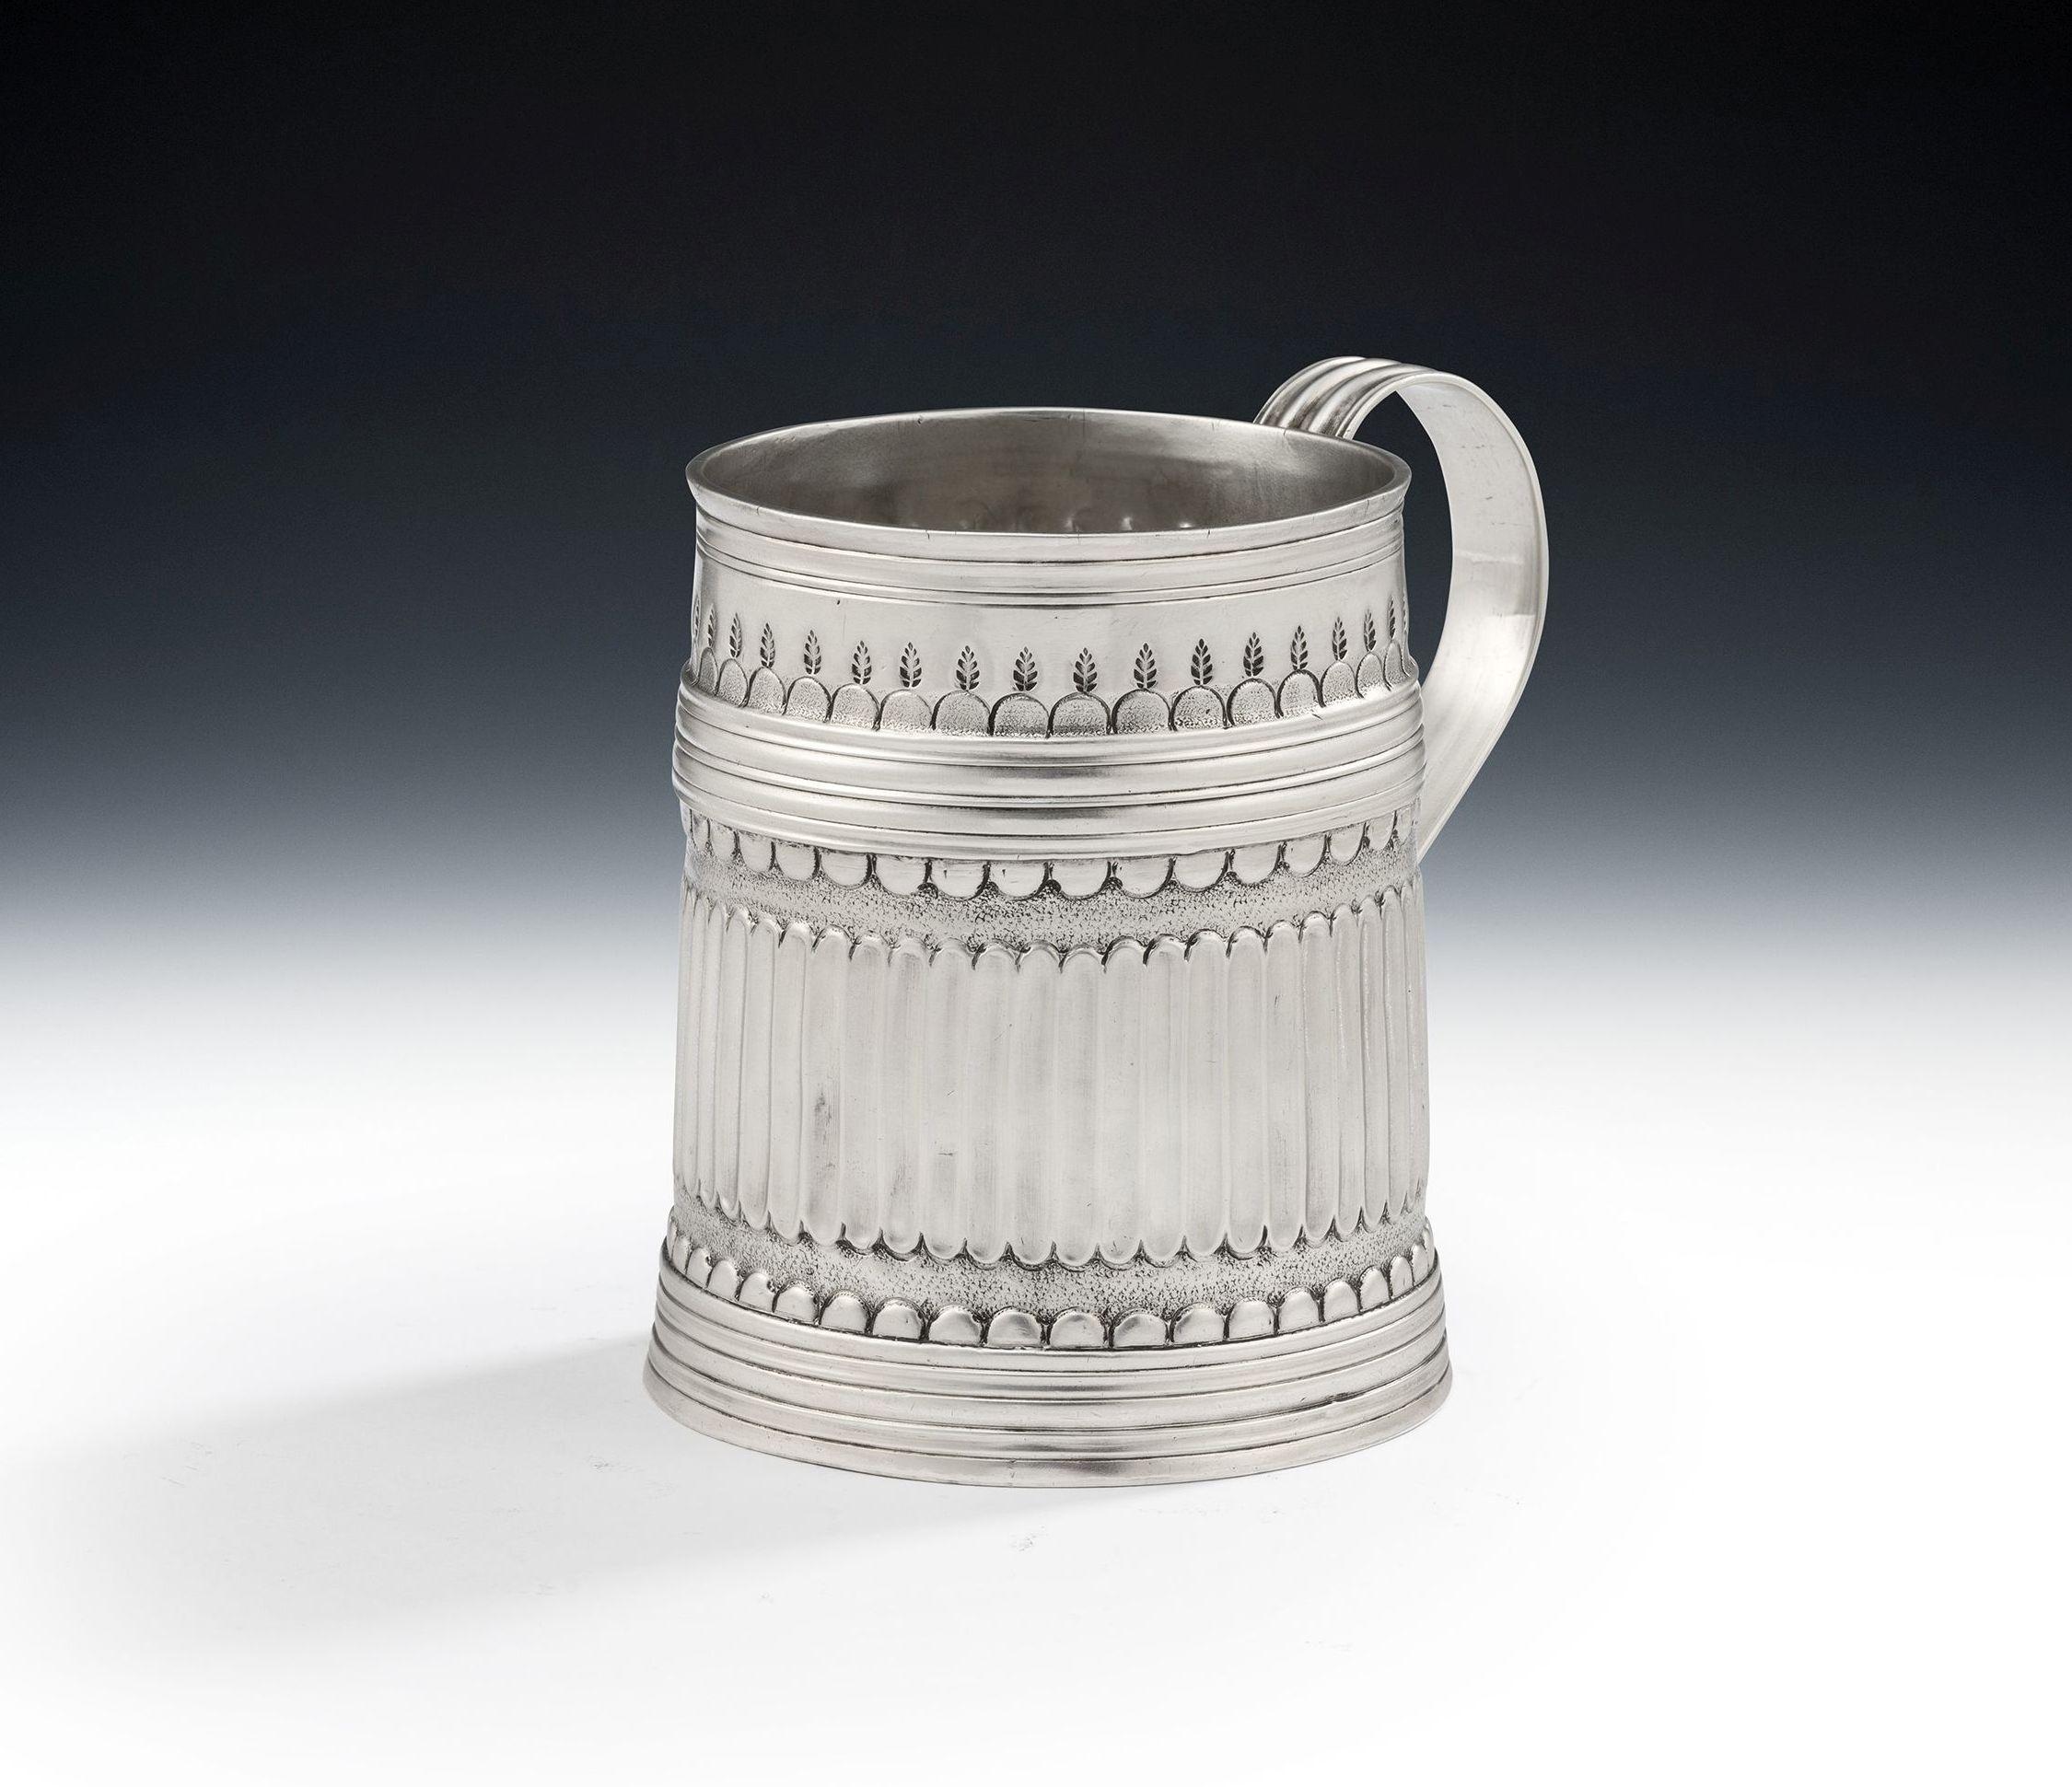 A Very Fine William III Britannia Standard Mug Made in London in 1699 by Thomas Parr I

The Mug has a slightly tapering 